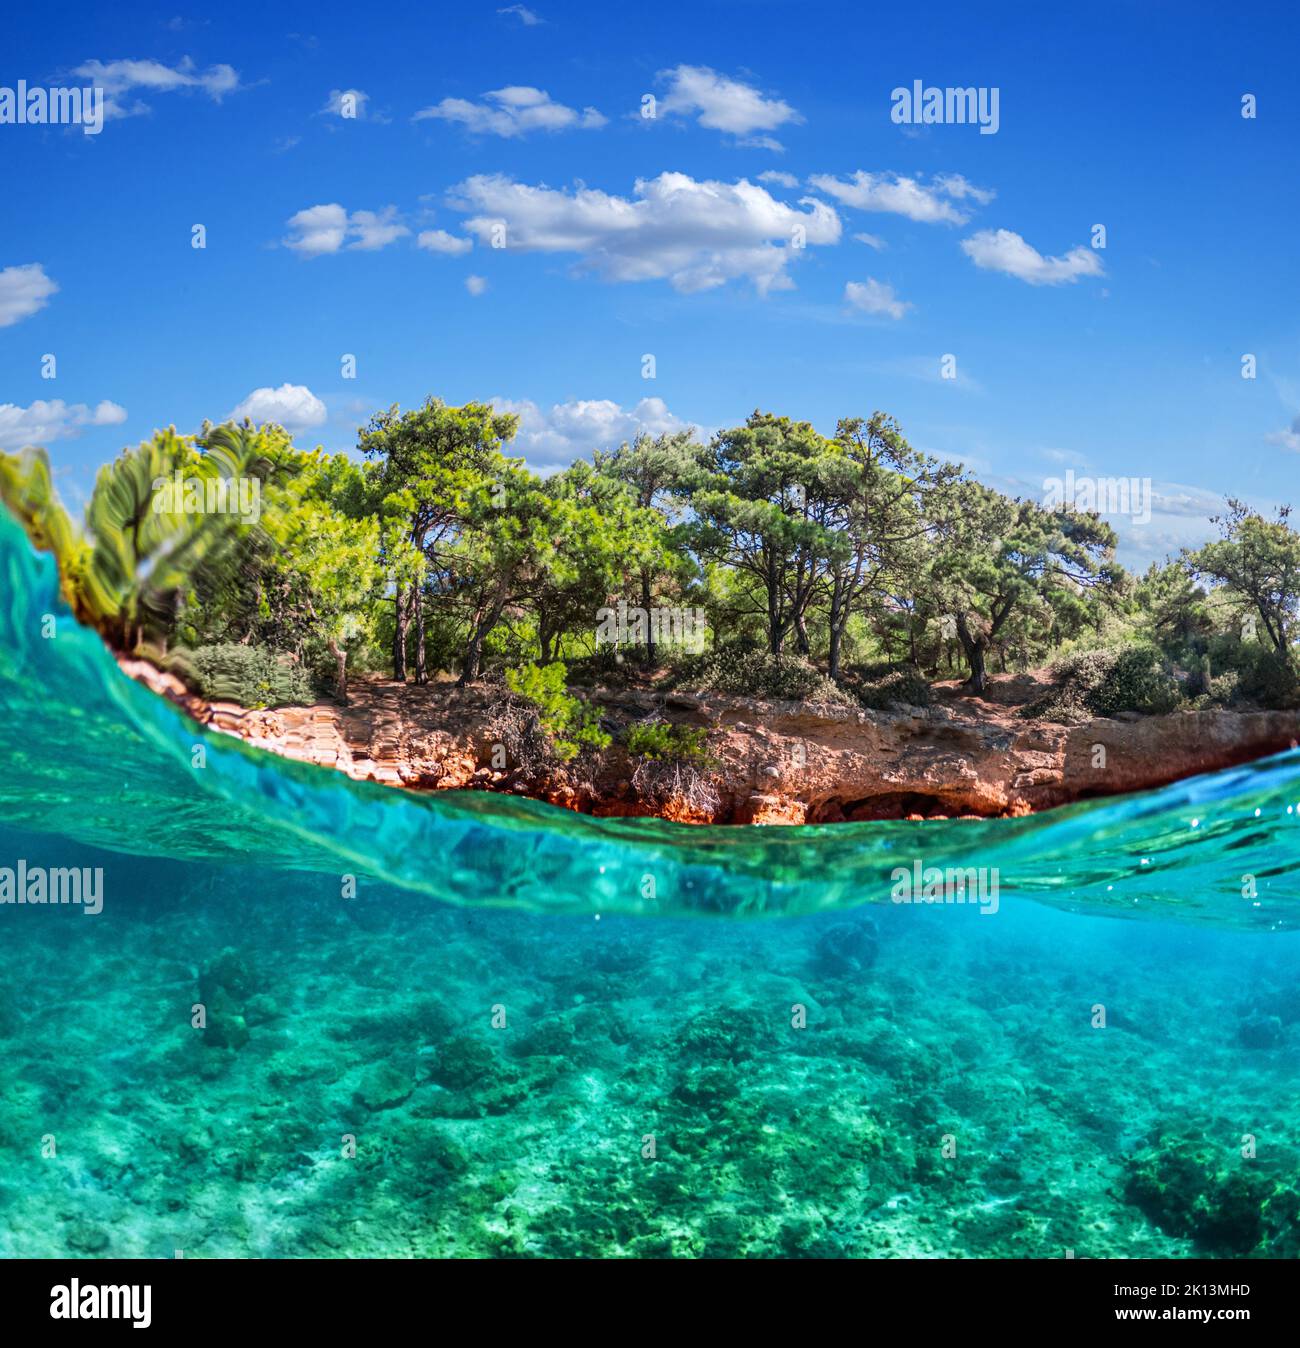 Split view - half underwater view of beautiful seabed and rocky coastline with pine trees, Turkey, Bodrum. Stock Photo